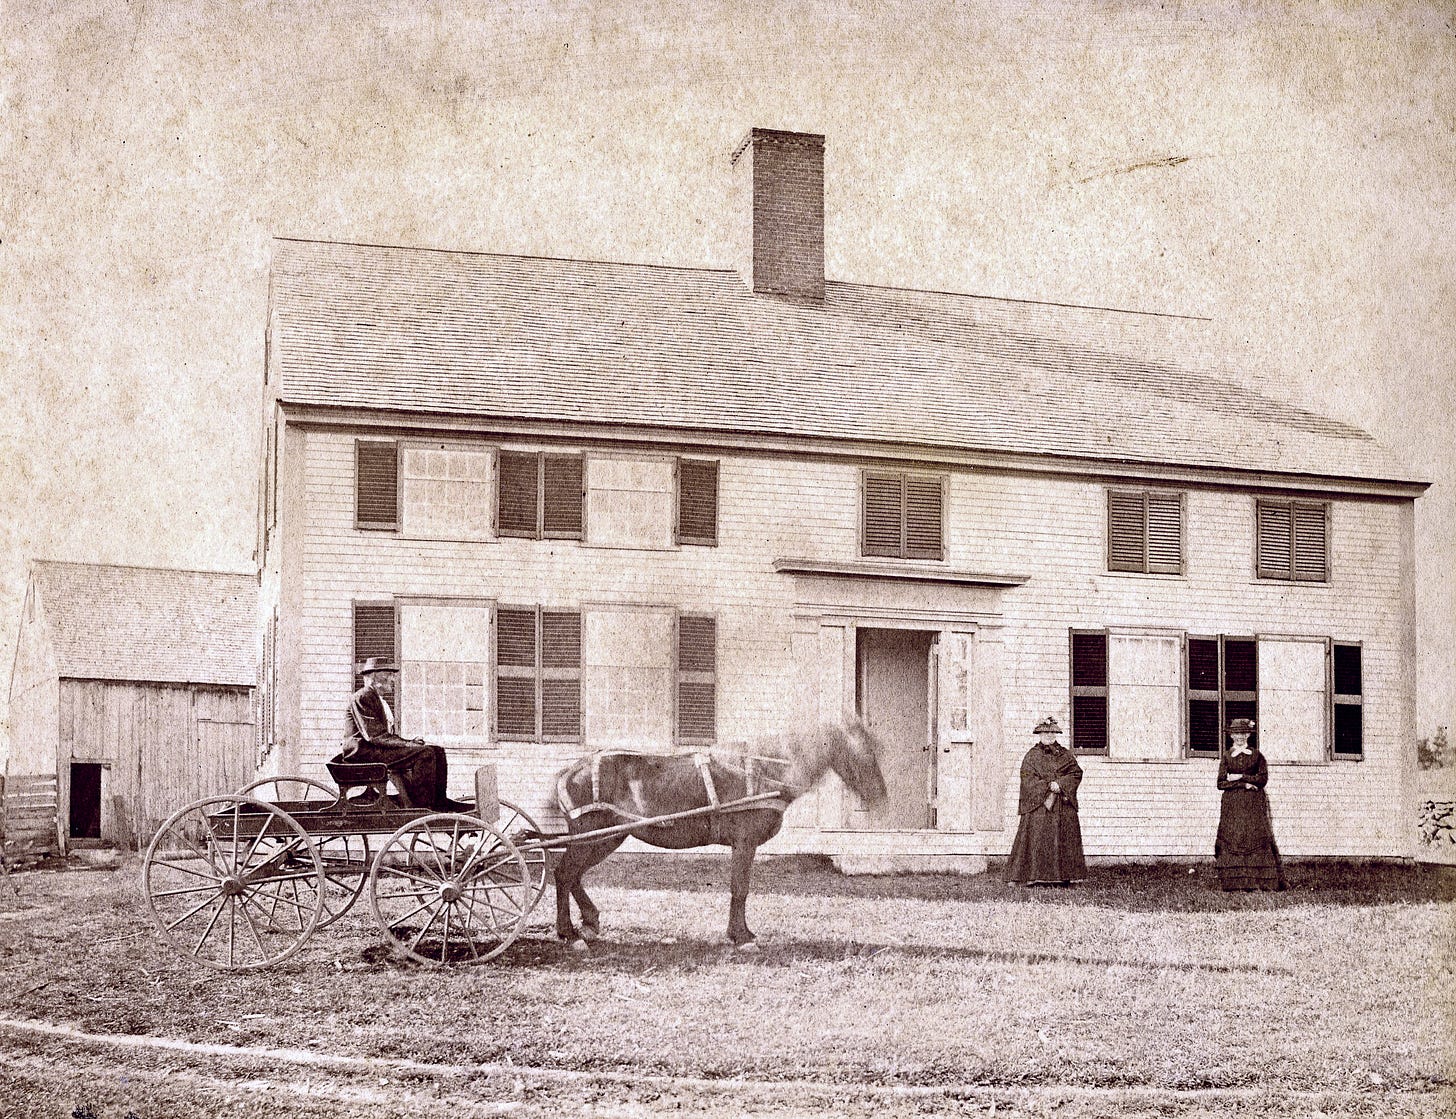 Man on horse drawn cart and two women in front of house